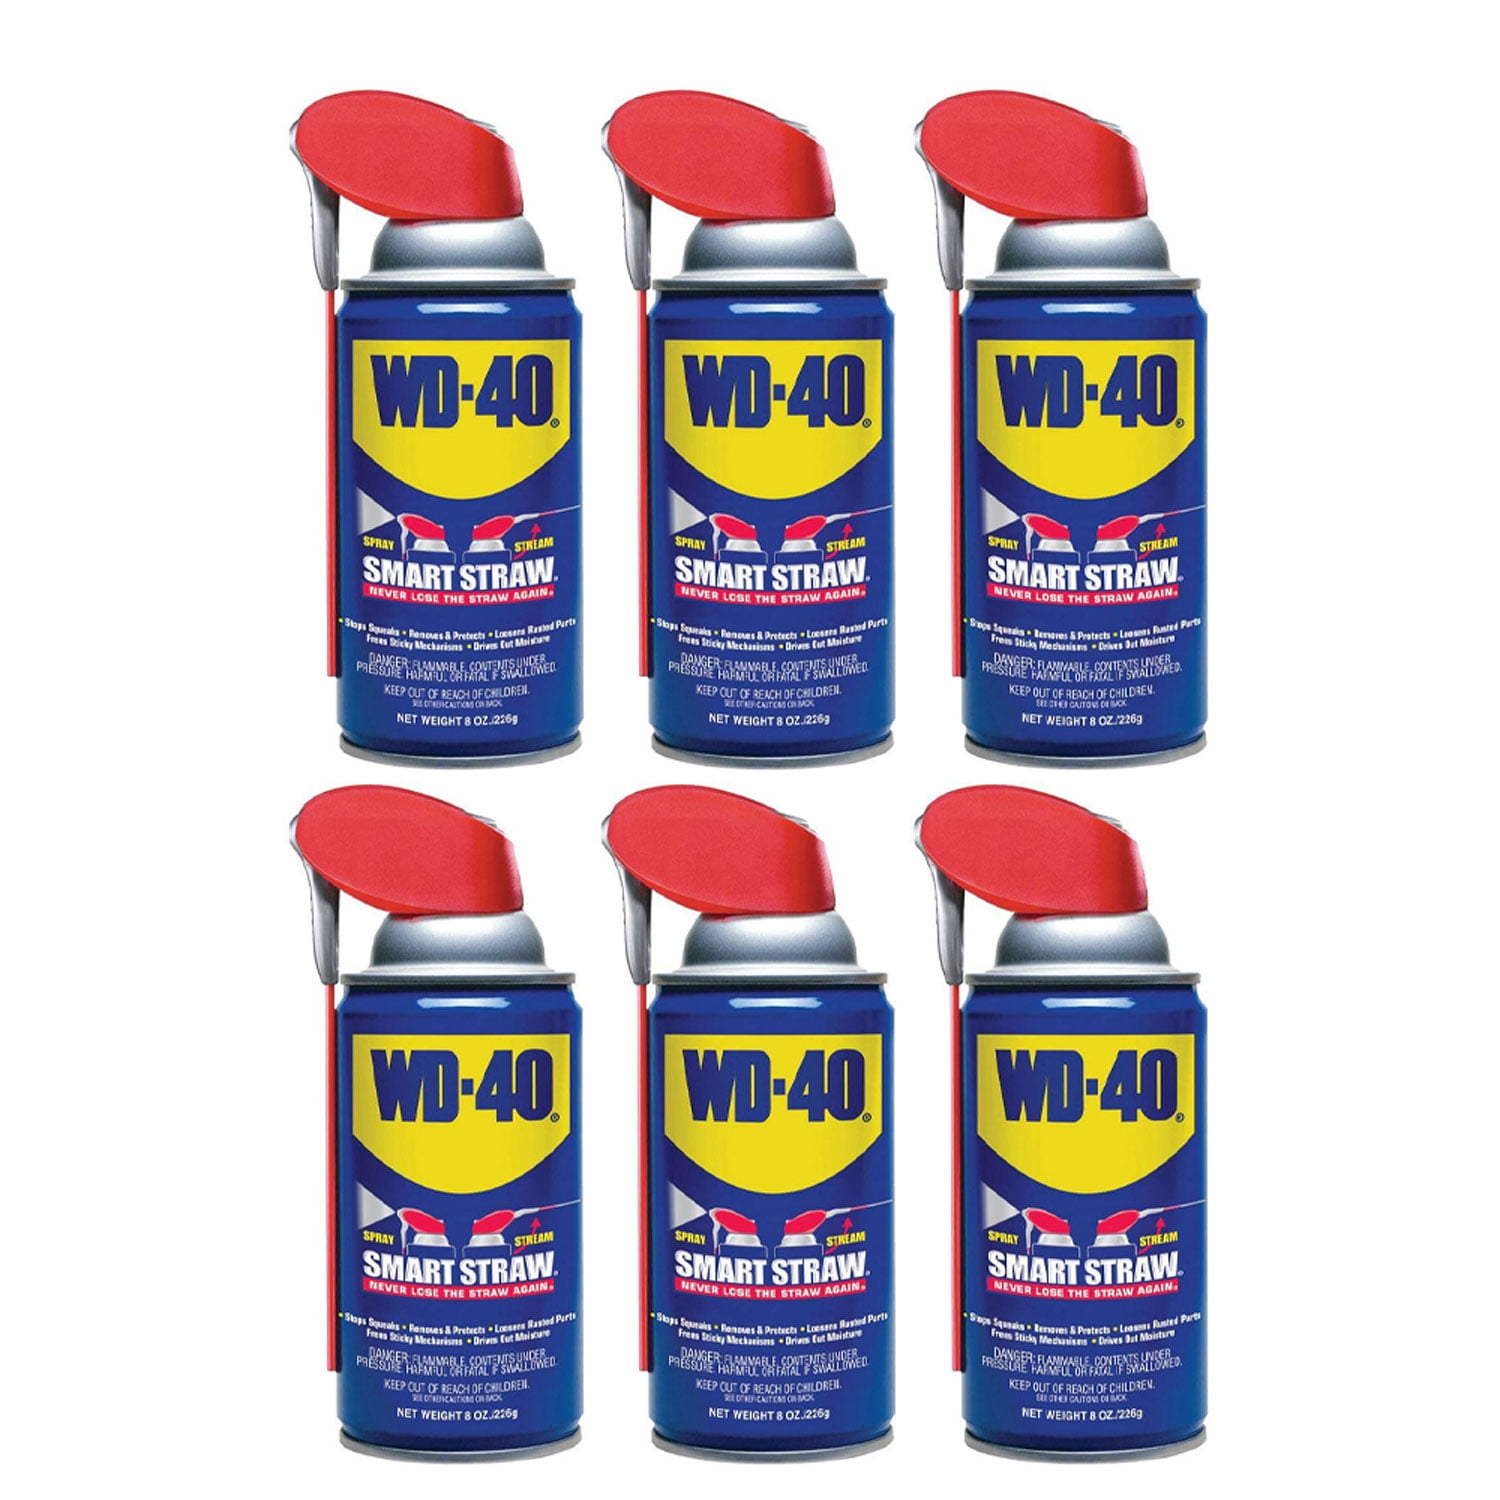 Wd 40 Multi Use Multi Surface Spray Lubricant With Smart Straw 8 Ounce